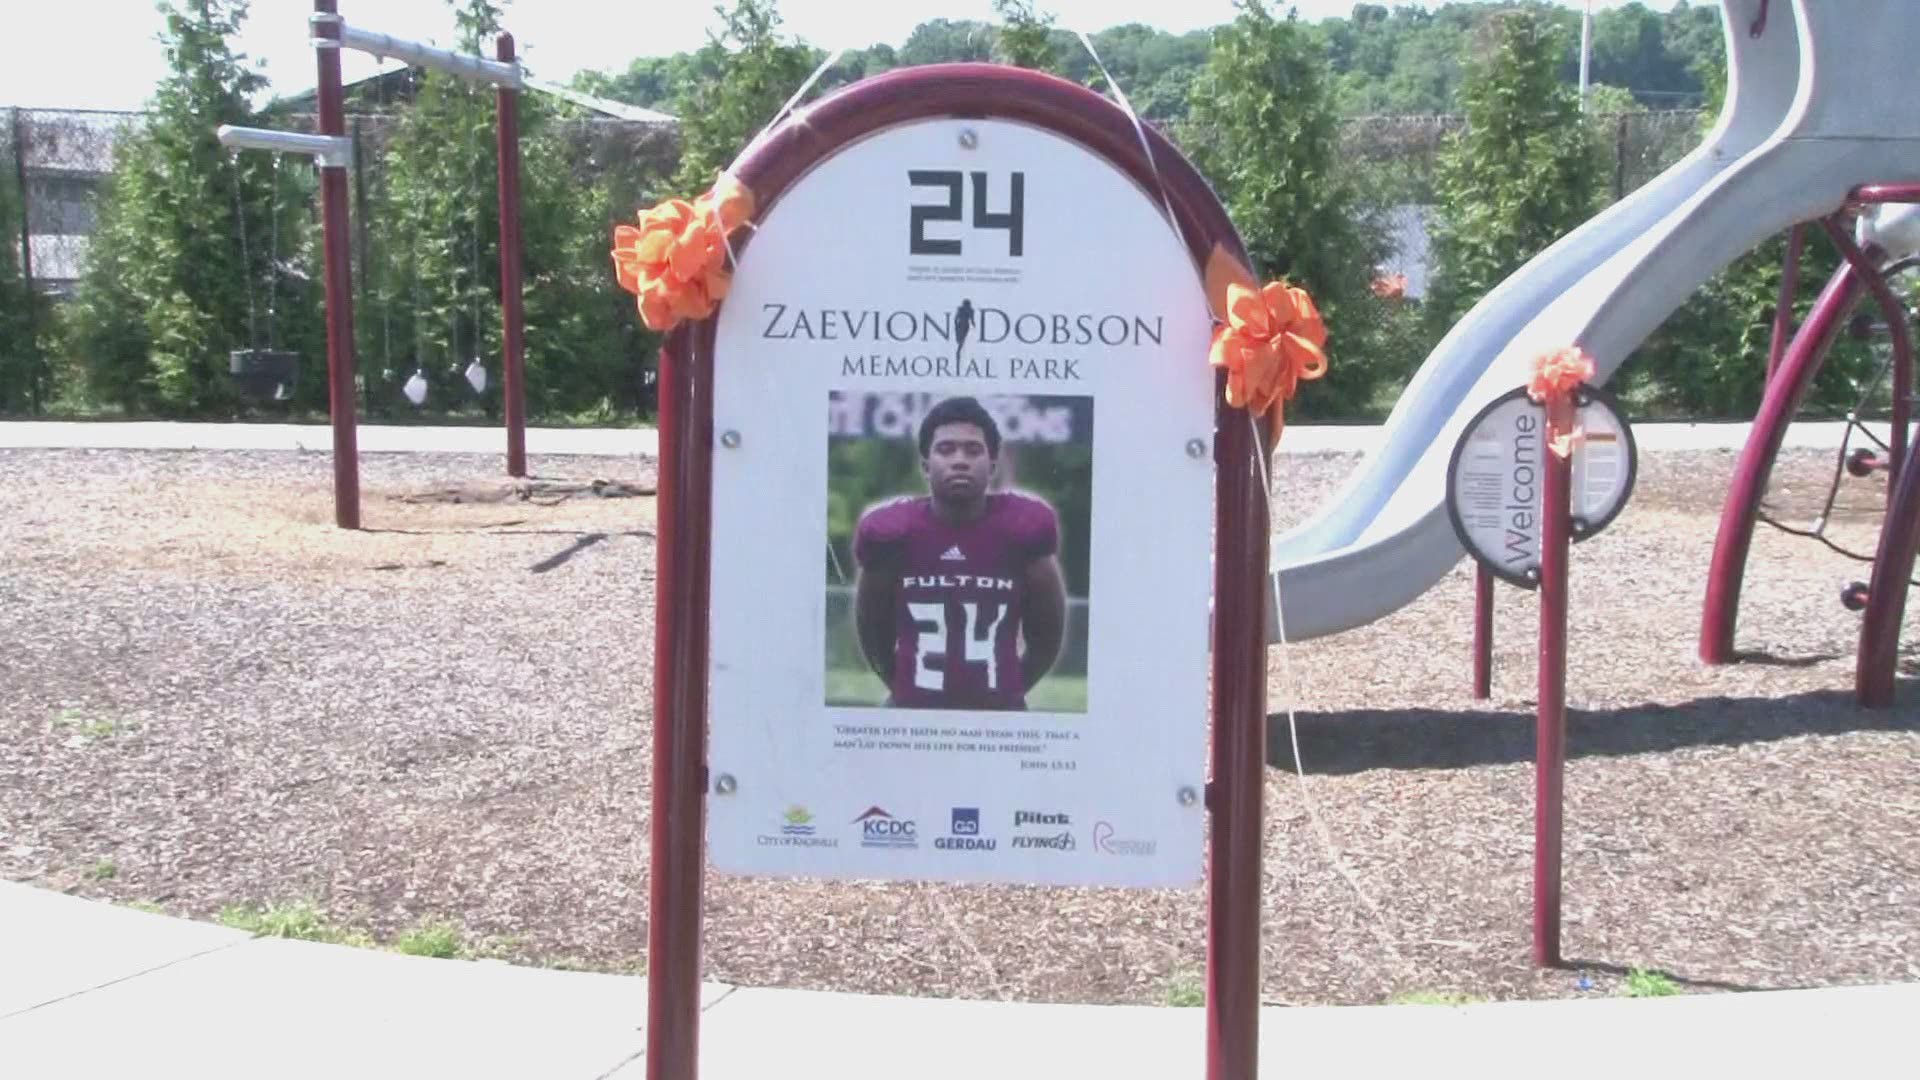 On Saturday, volunteers gathered in Zaevion Dobson Memorial Park to clean up in memory of the teen lost to gun violence in 2015.